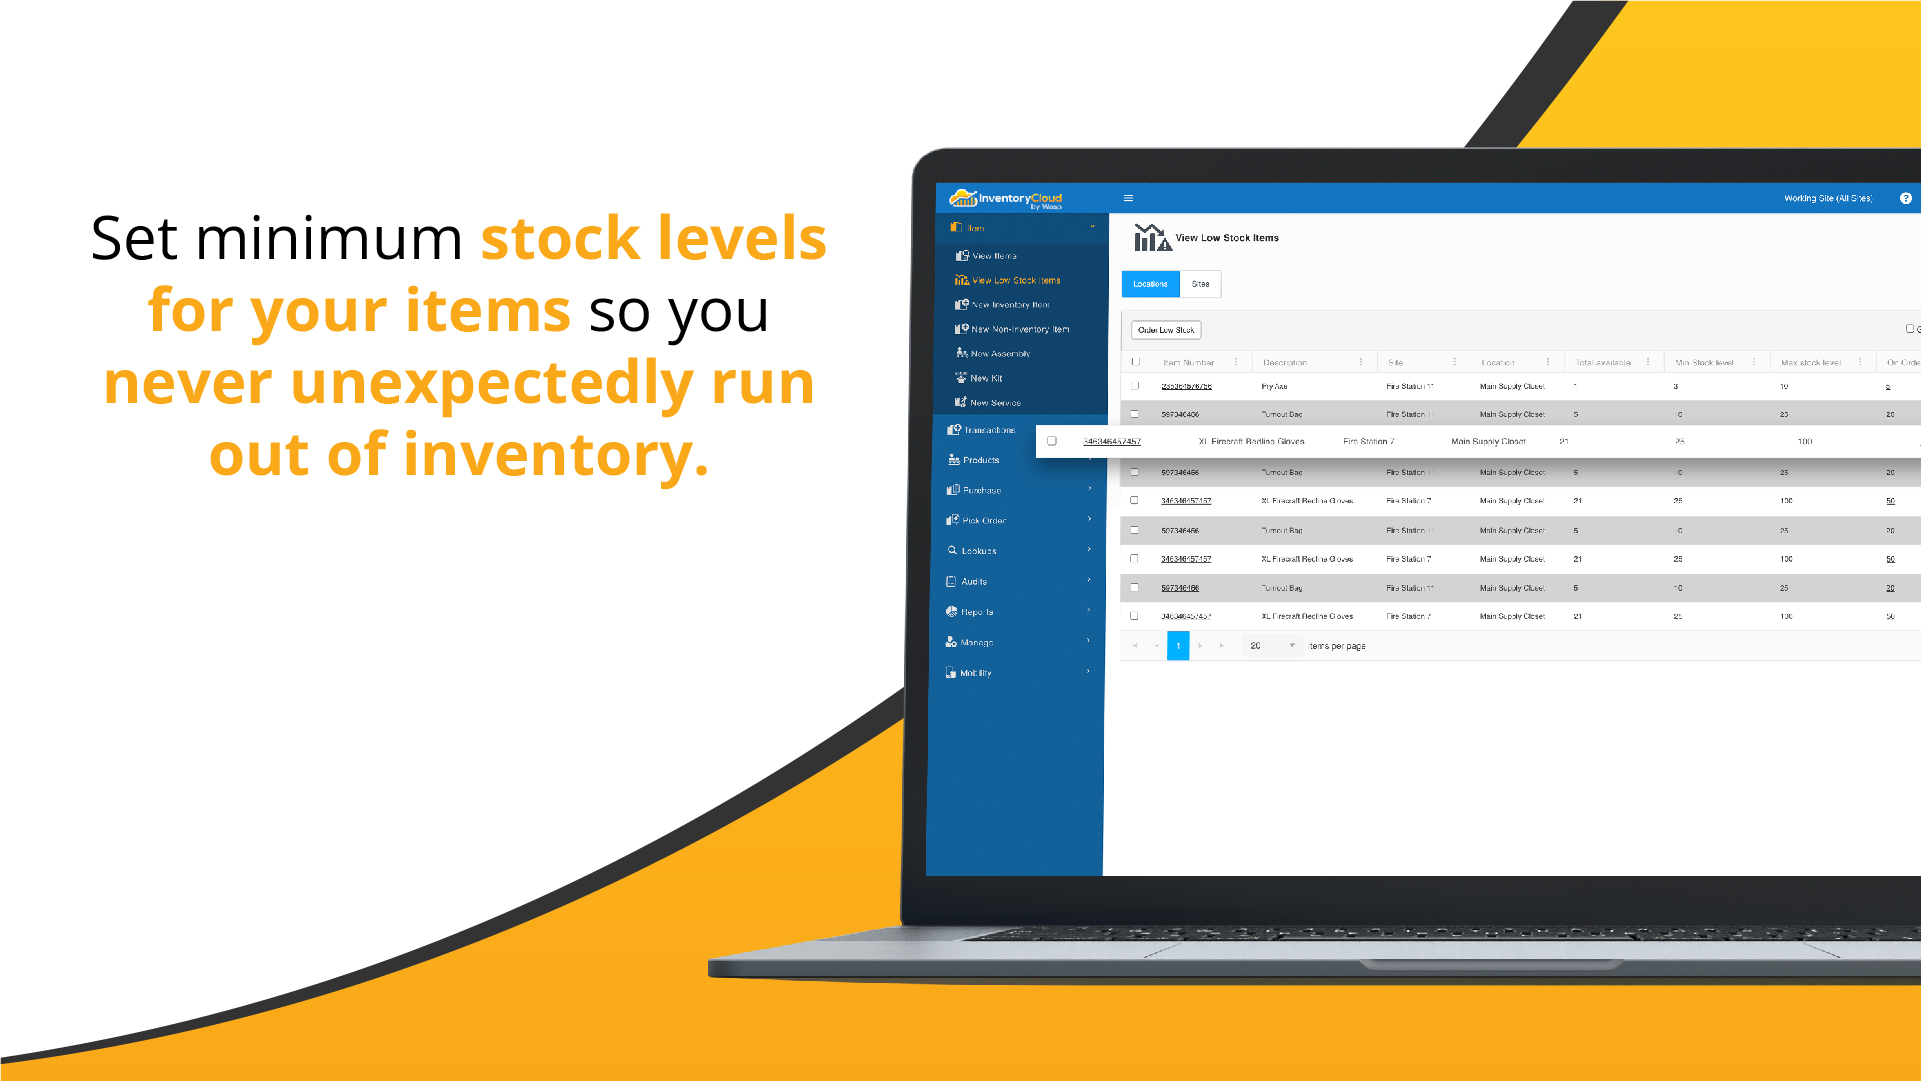 Set minimum stock levels for your items so you never unexpectedly run out of inventory